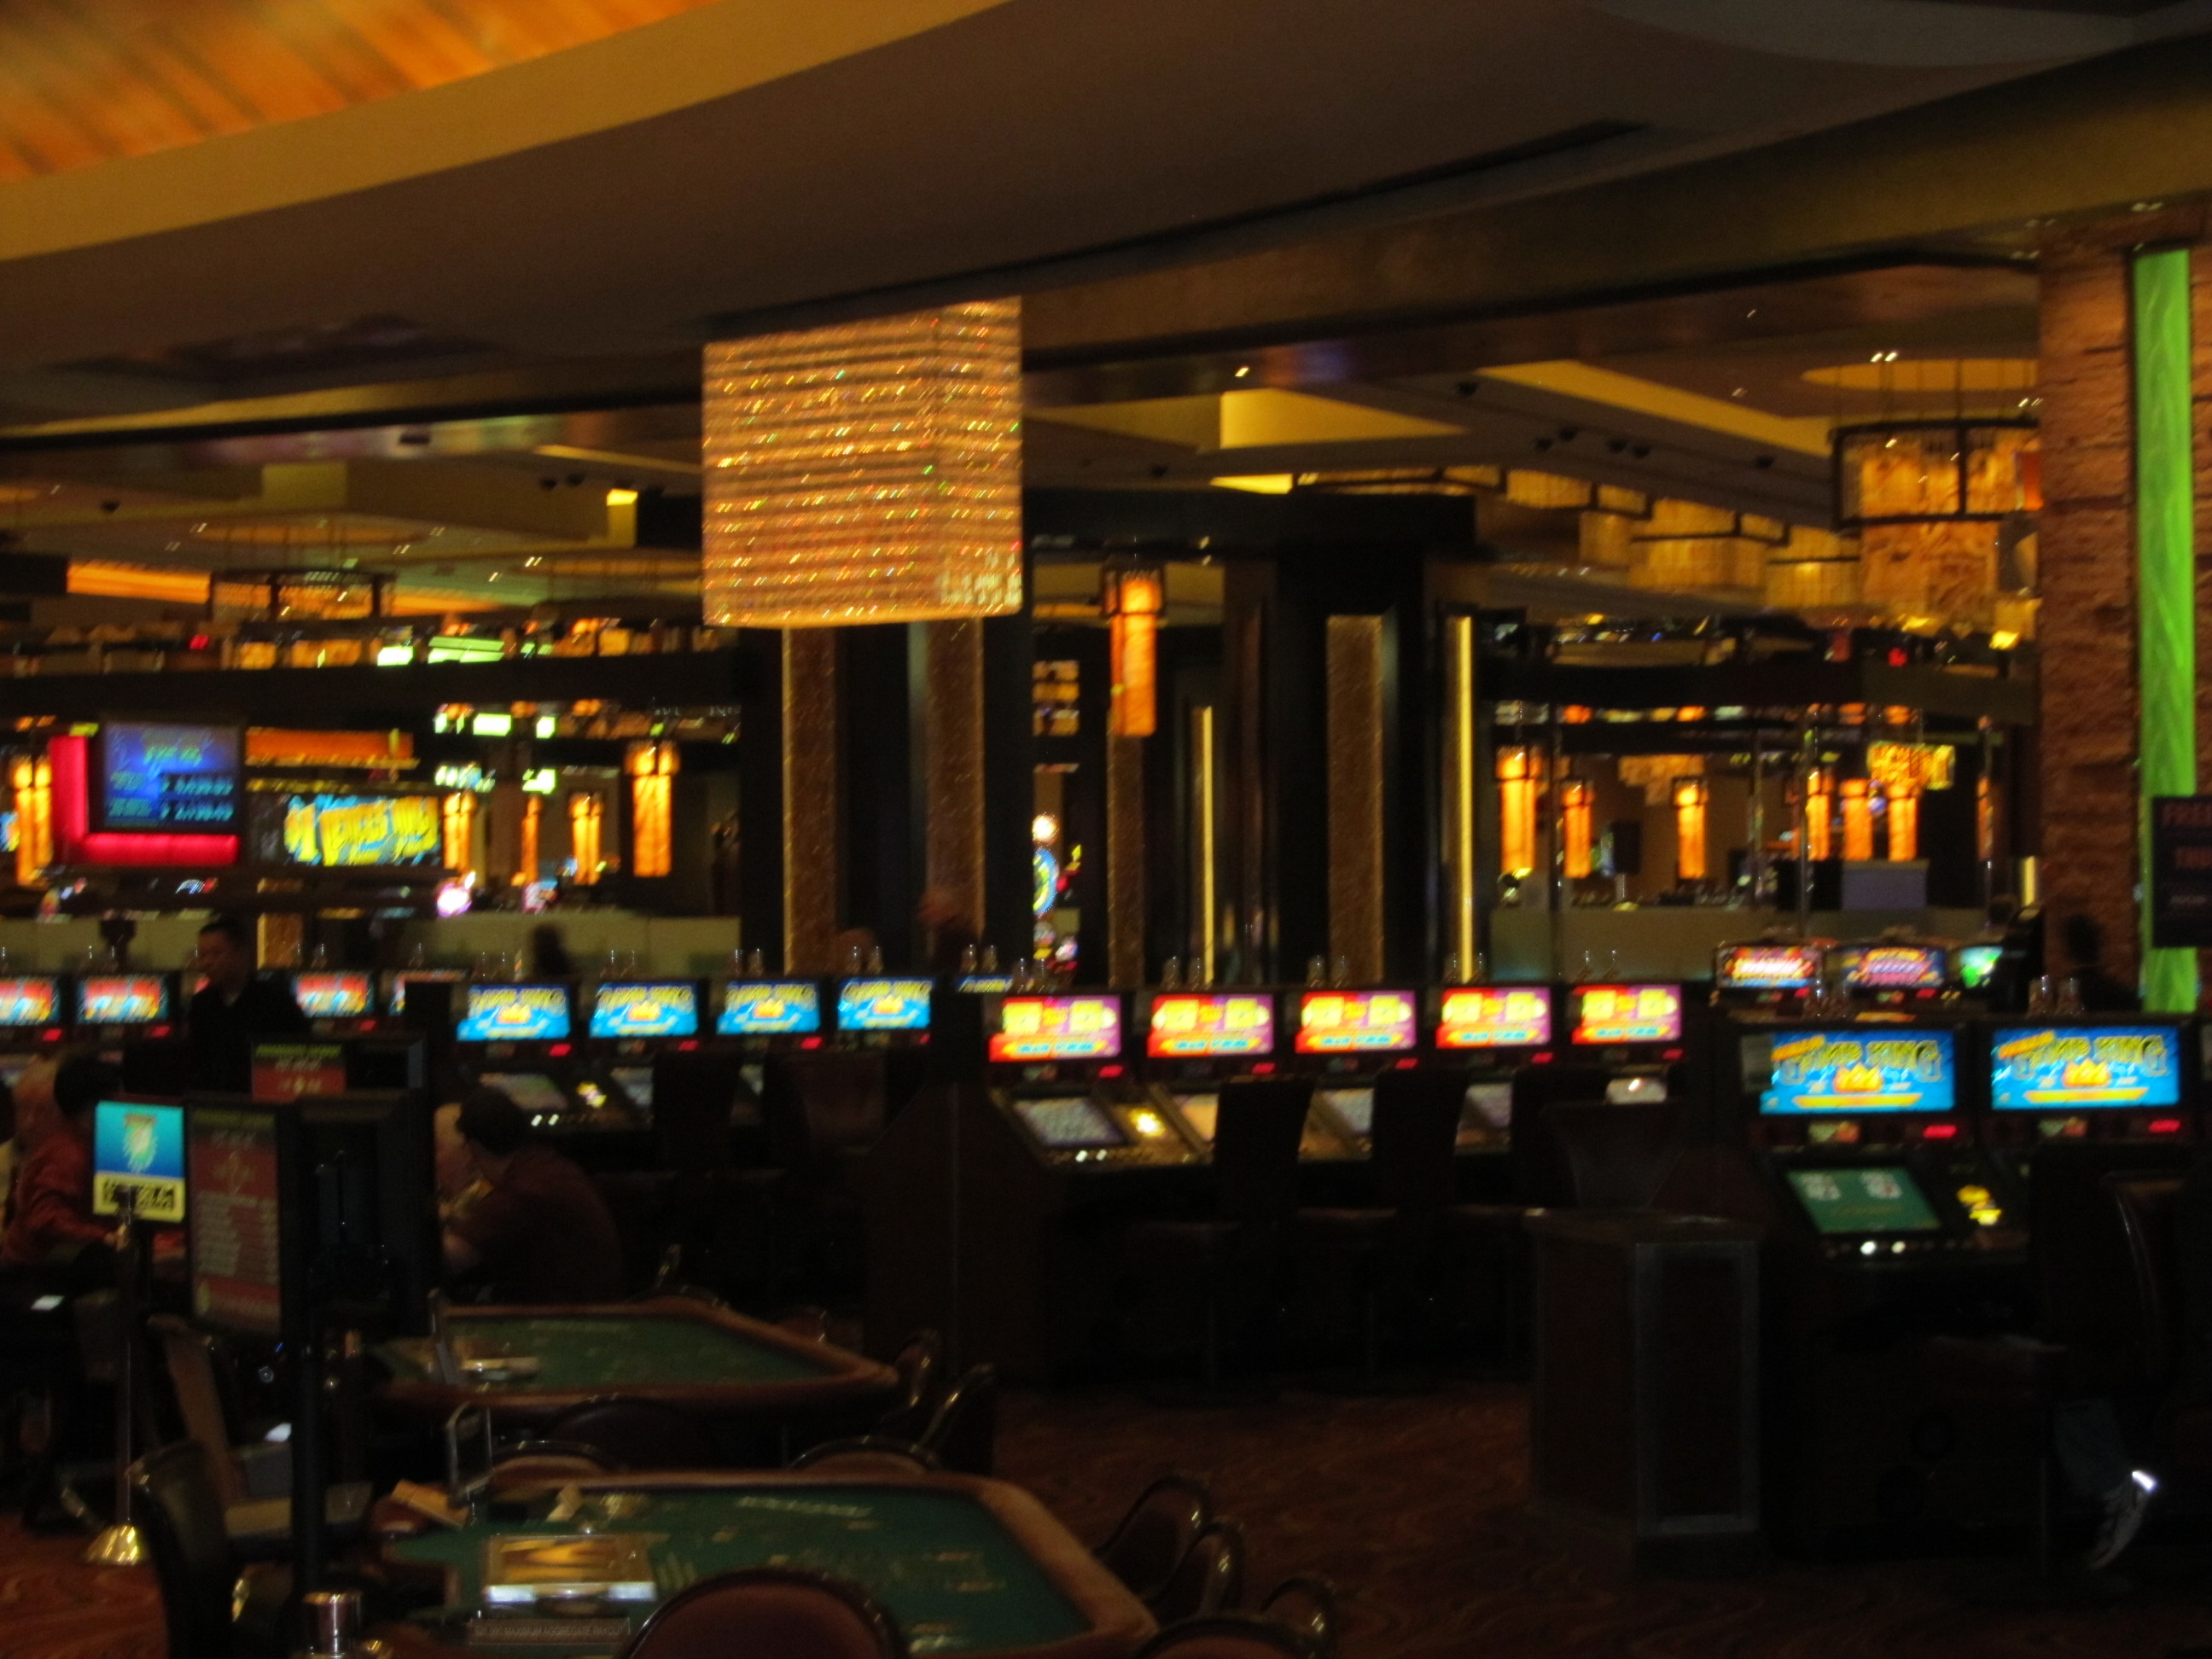 The Red Rock Casino